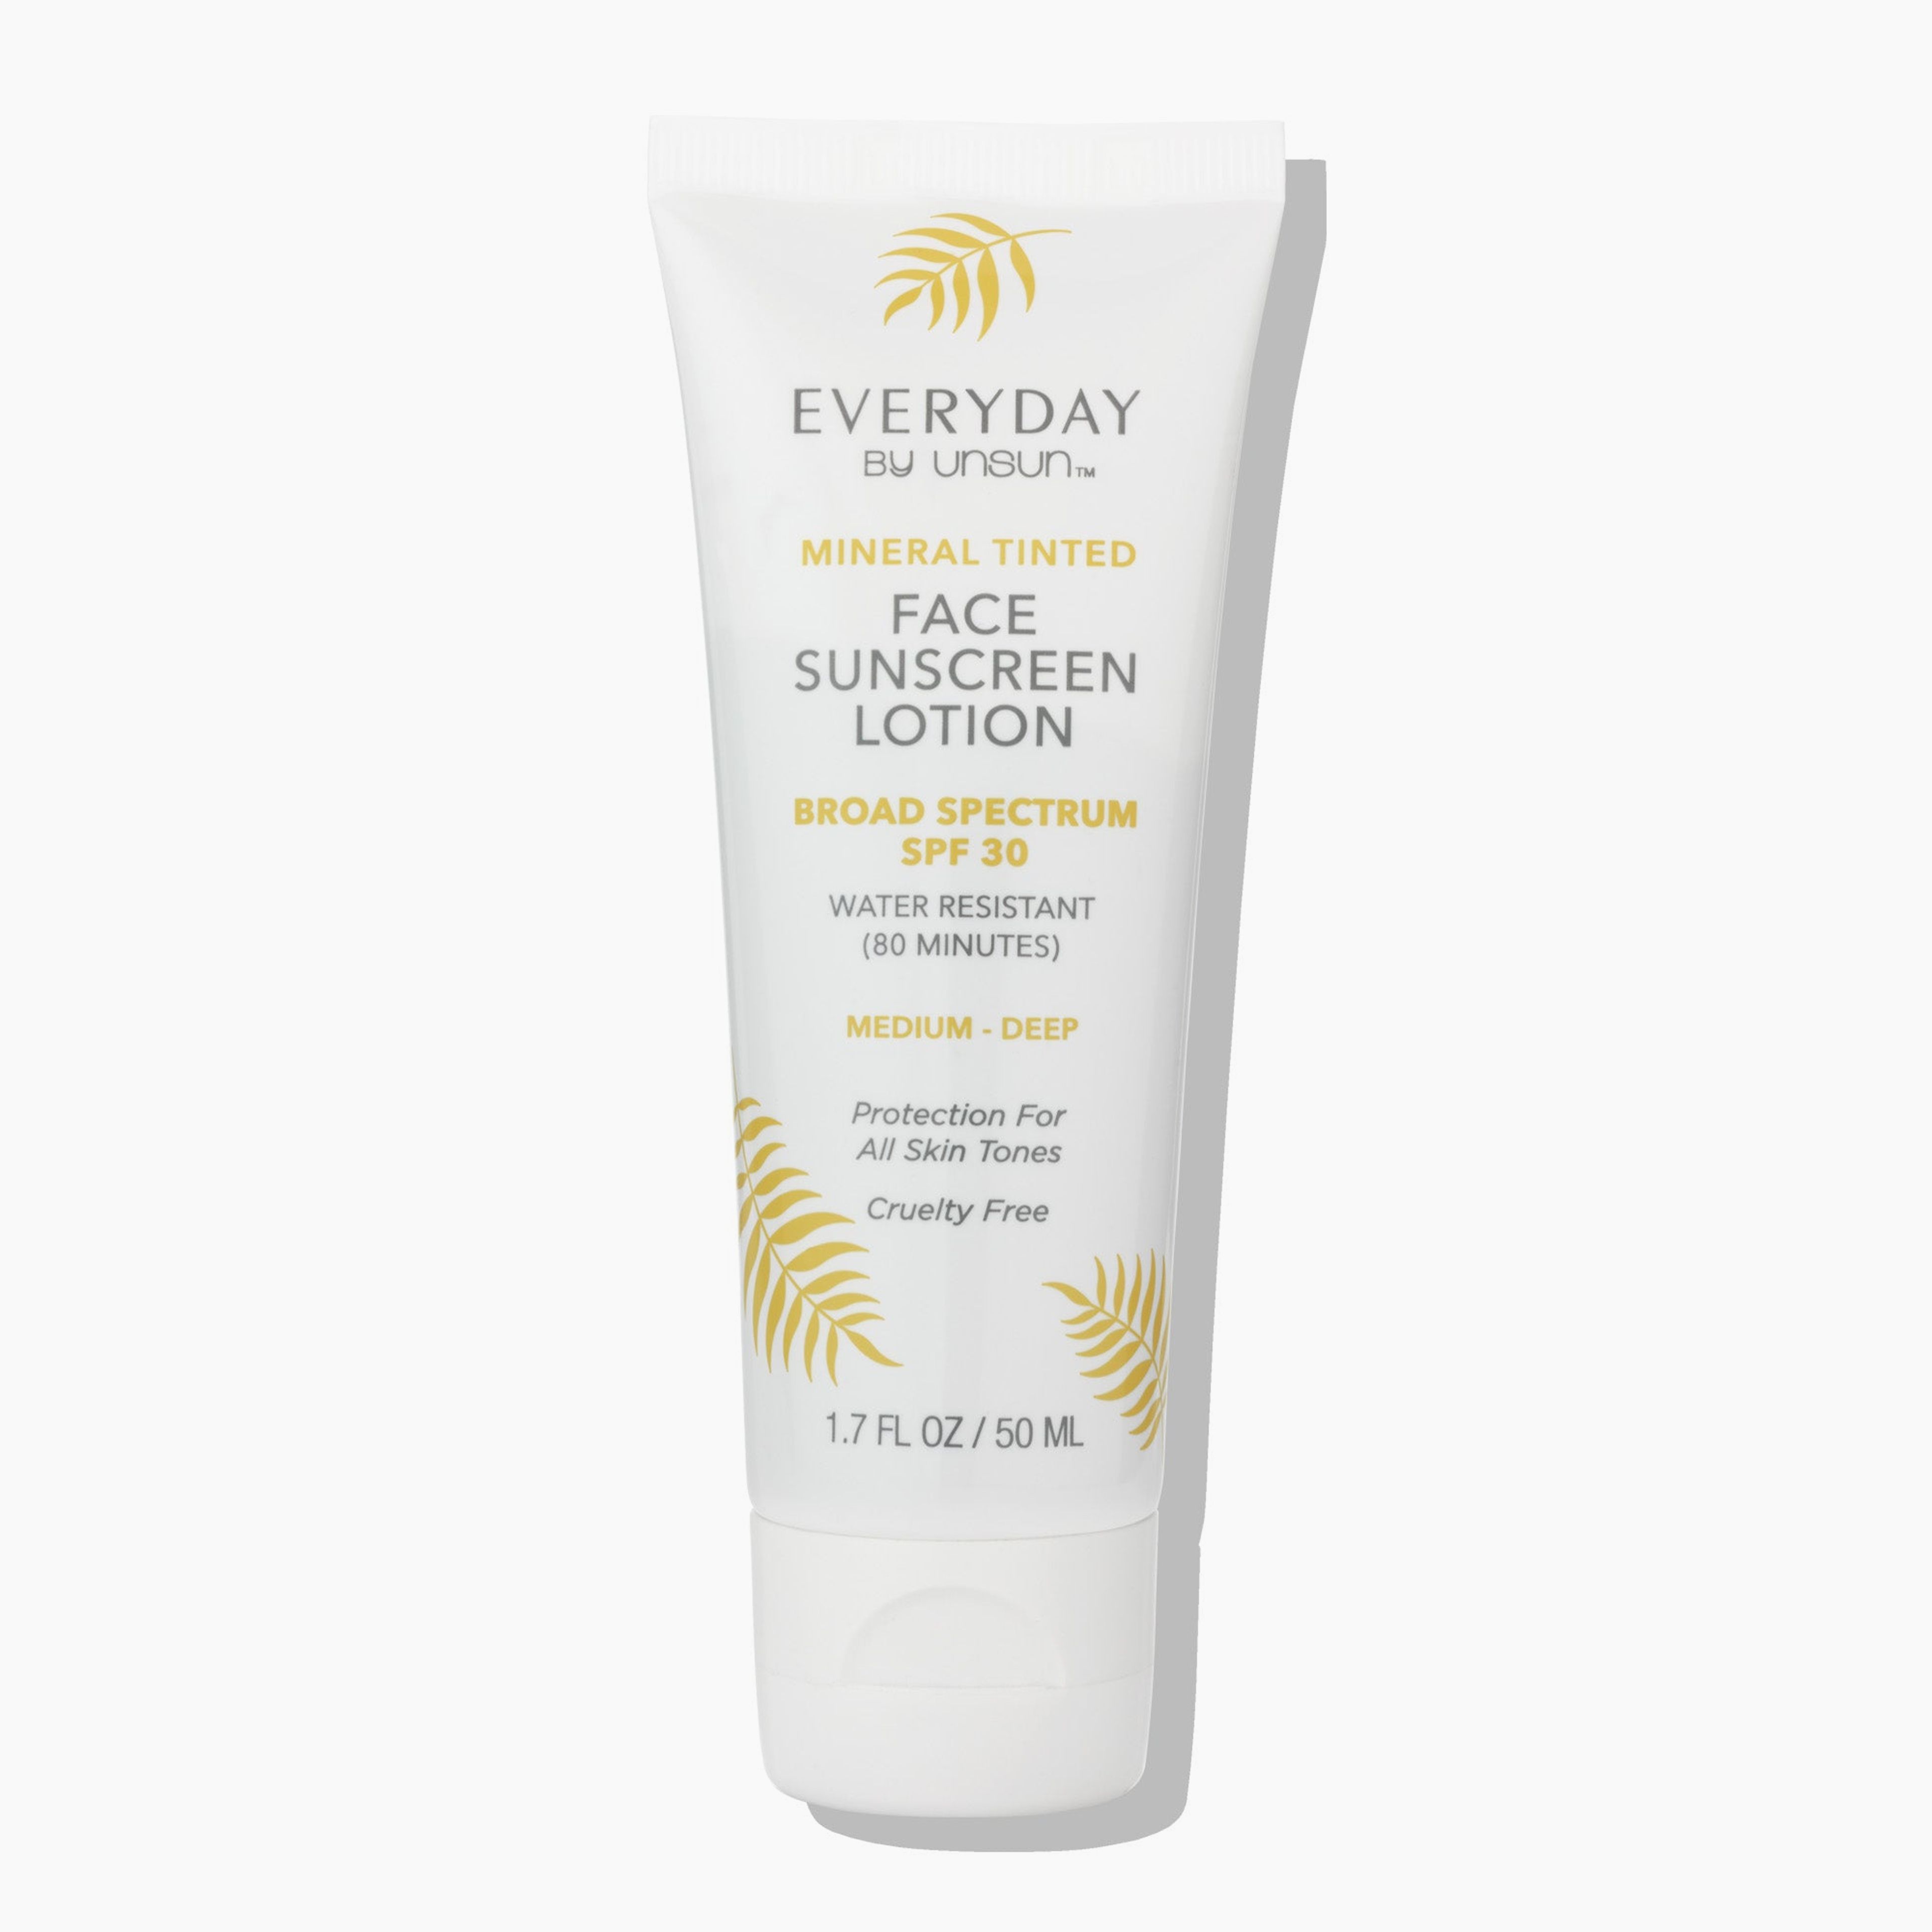 EVERYDAY Mineral Tinted Face Sunscreen Lotion SPF30 Medium|Deep